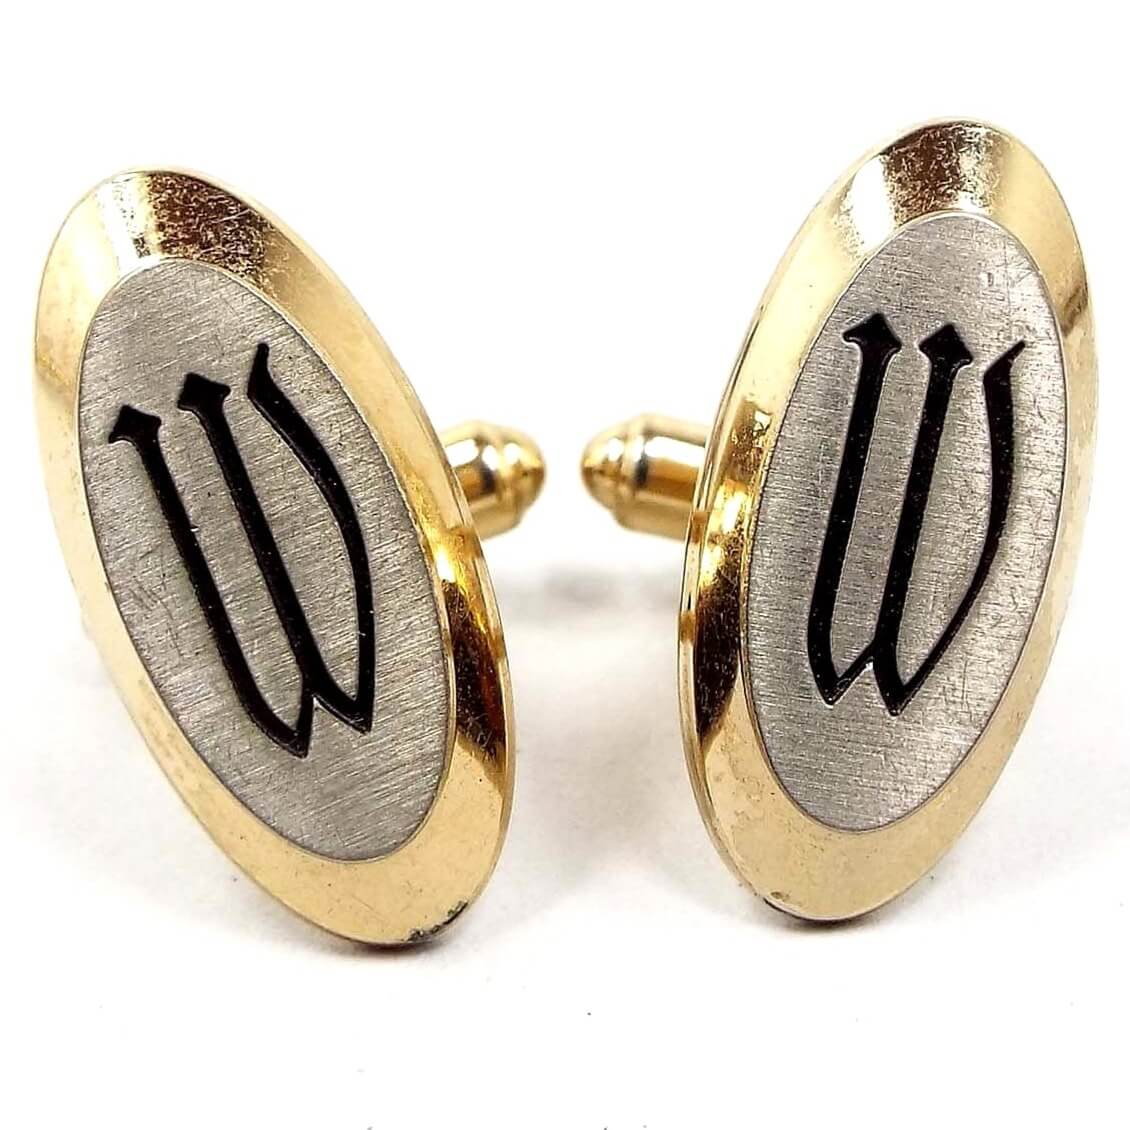 Front view of the Mid Century vintage Hickok initial cufflinks. They are mostly gold tone in color with matte silver tone color fronts. The letter W is engraved in black on the front.